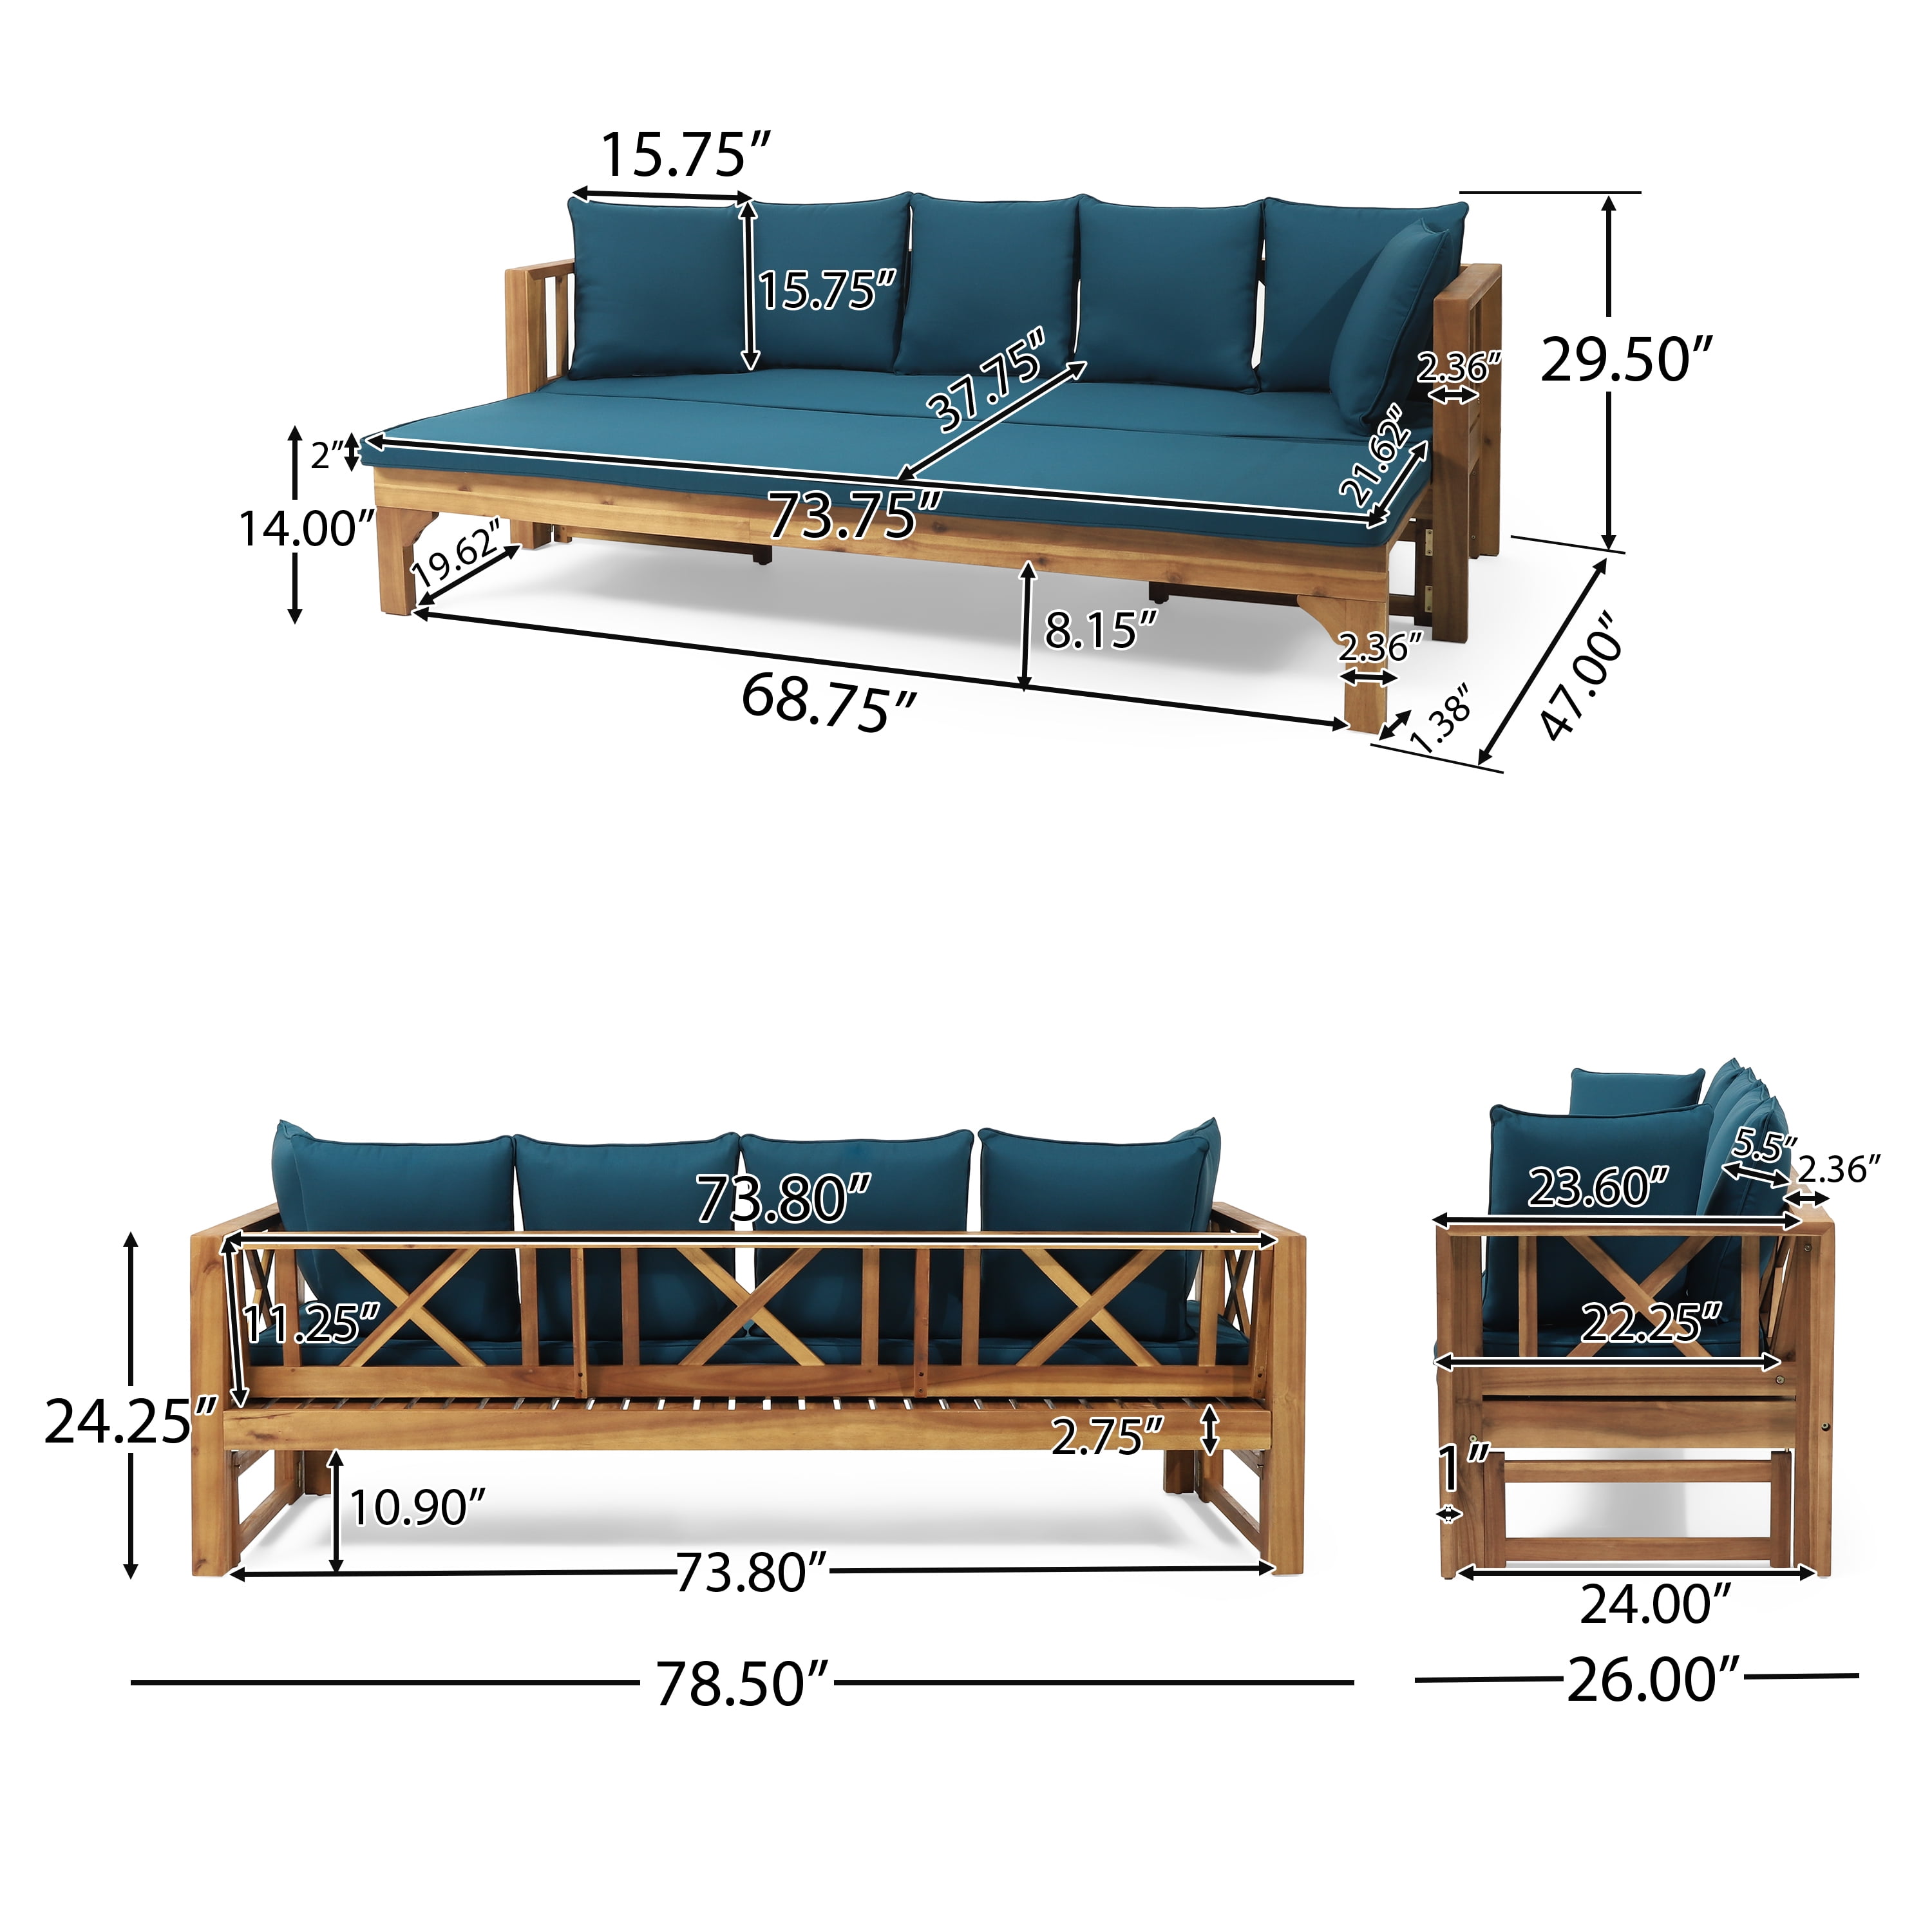 Daybed GDF Acacia Camille Extendable Sofa, Teal Dark Teak and Studio Wood Outdoor